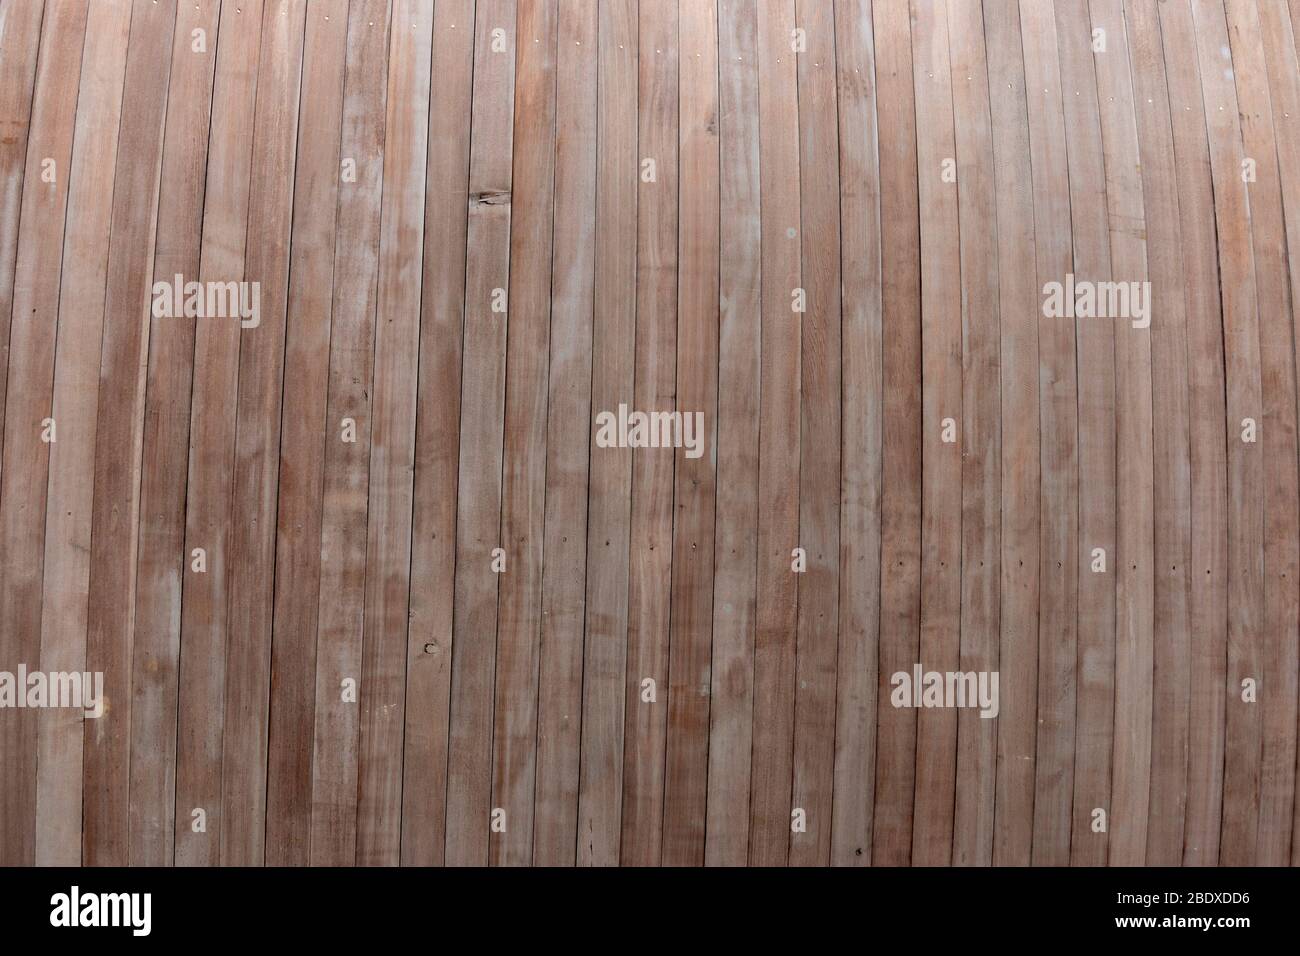 a close up view of long slats of wood making up the underneath of a roof Stock Photo